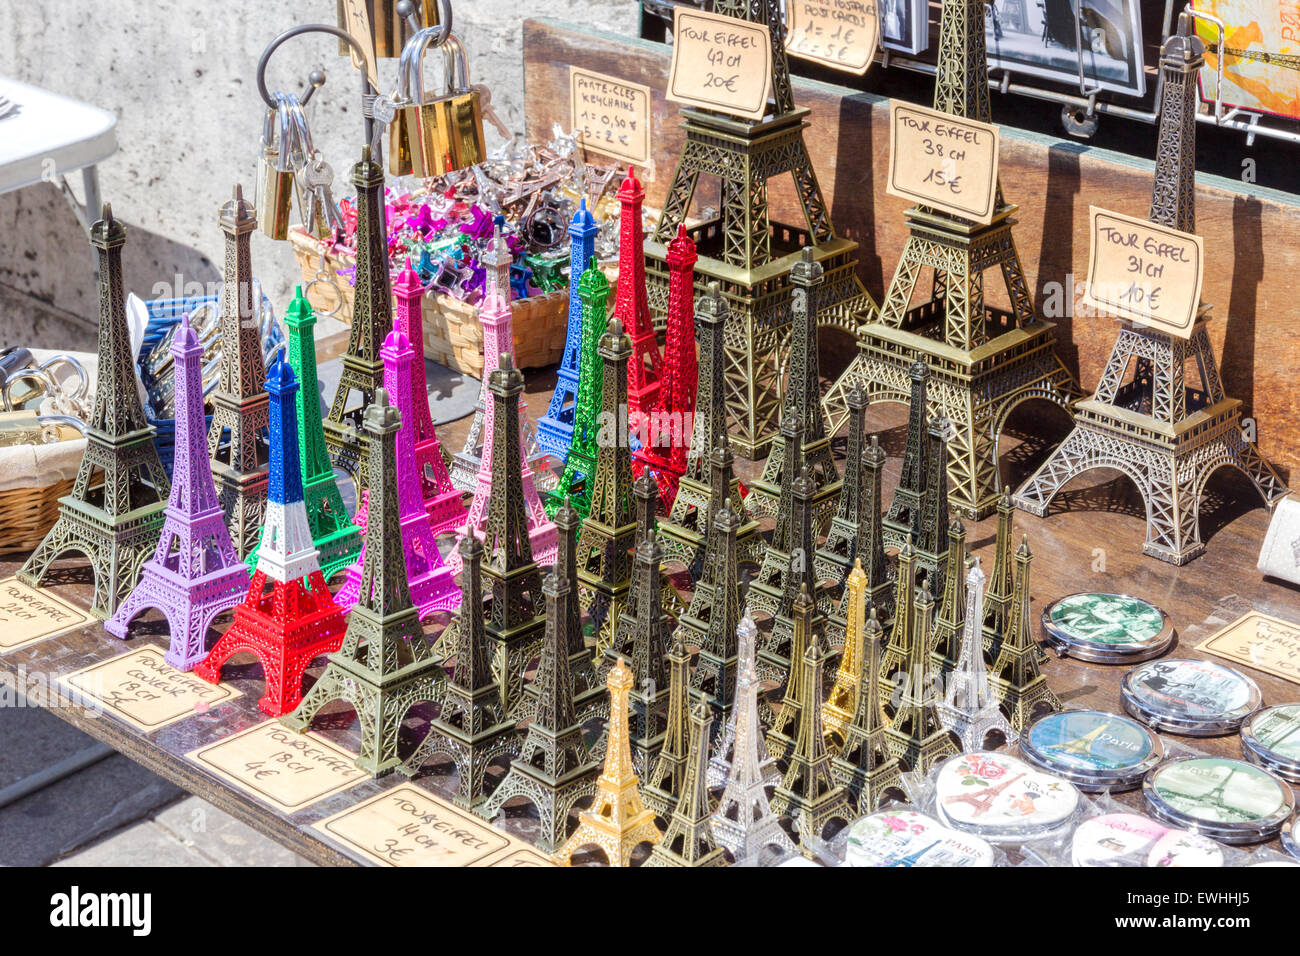 Eiffel tower statuettes being sold at a tourist stand in Paris, France. Stock Photo